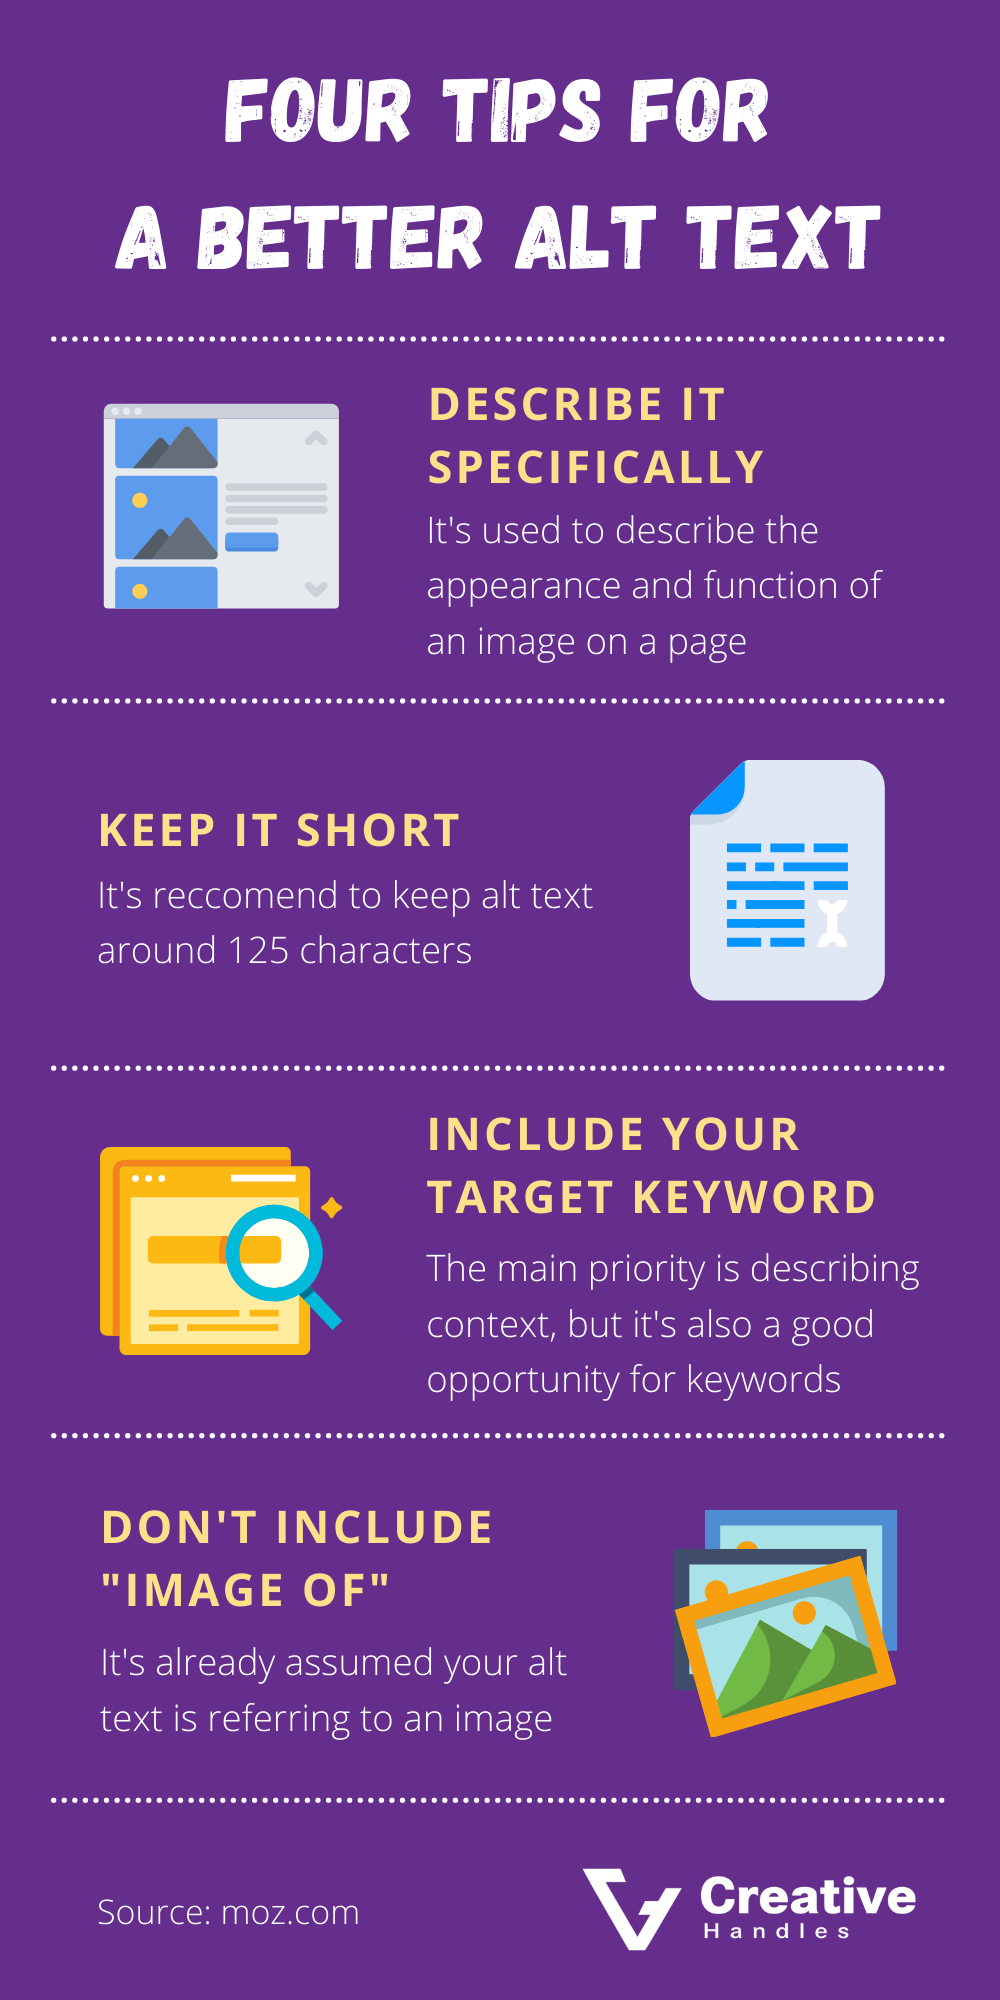 Infographics 4 tips for a better Alt text (Describe it specifically, keep it short, include your target keyword, don't include "image of")